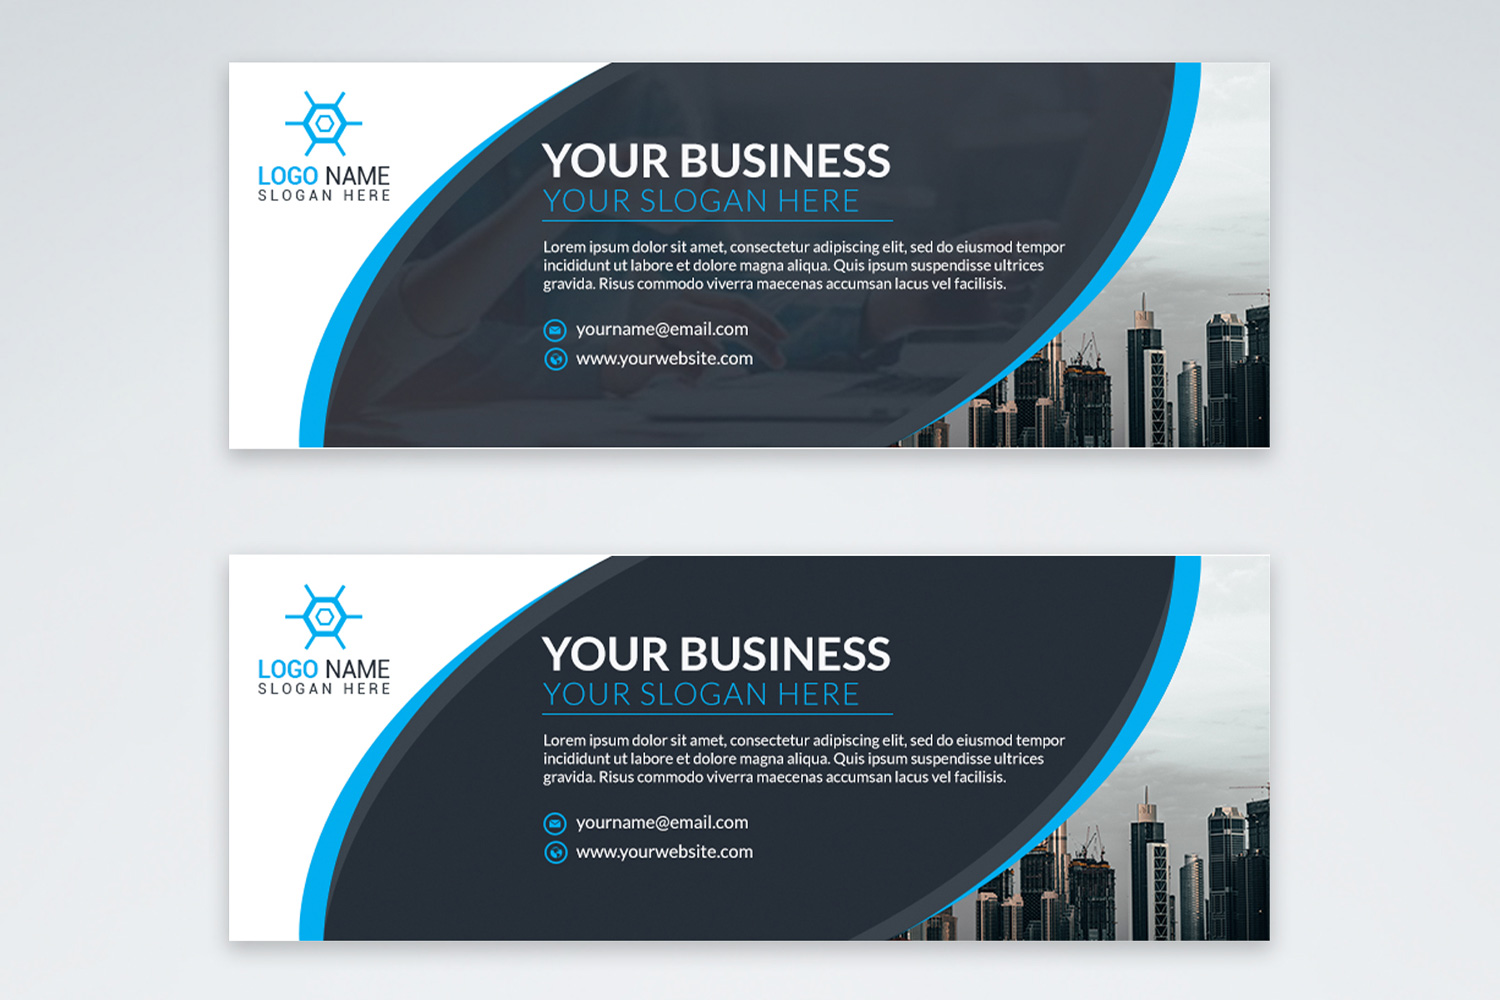 Corporate Facebook Cover Design Template with blue color.